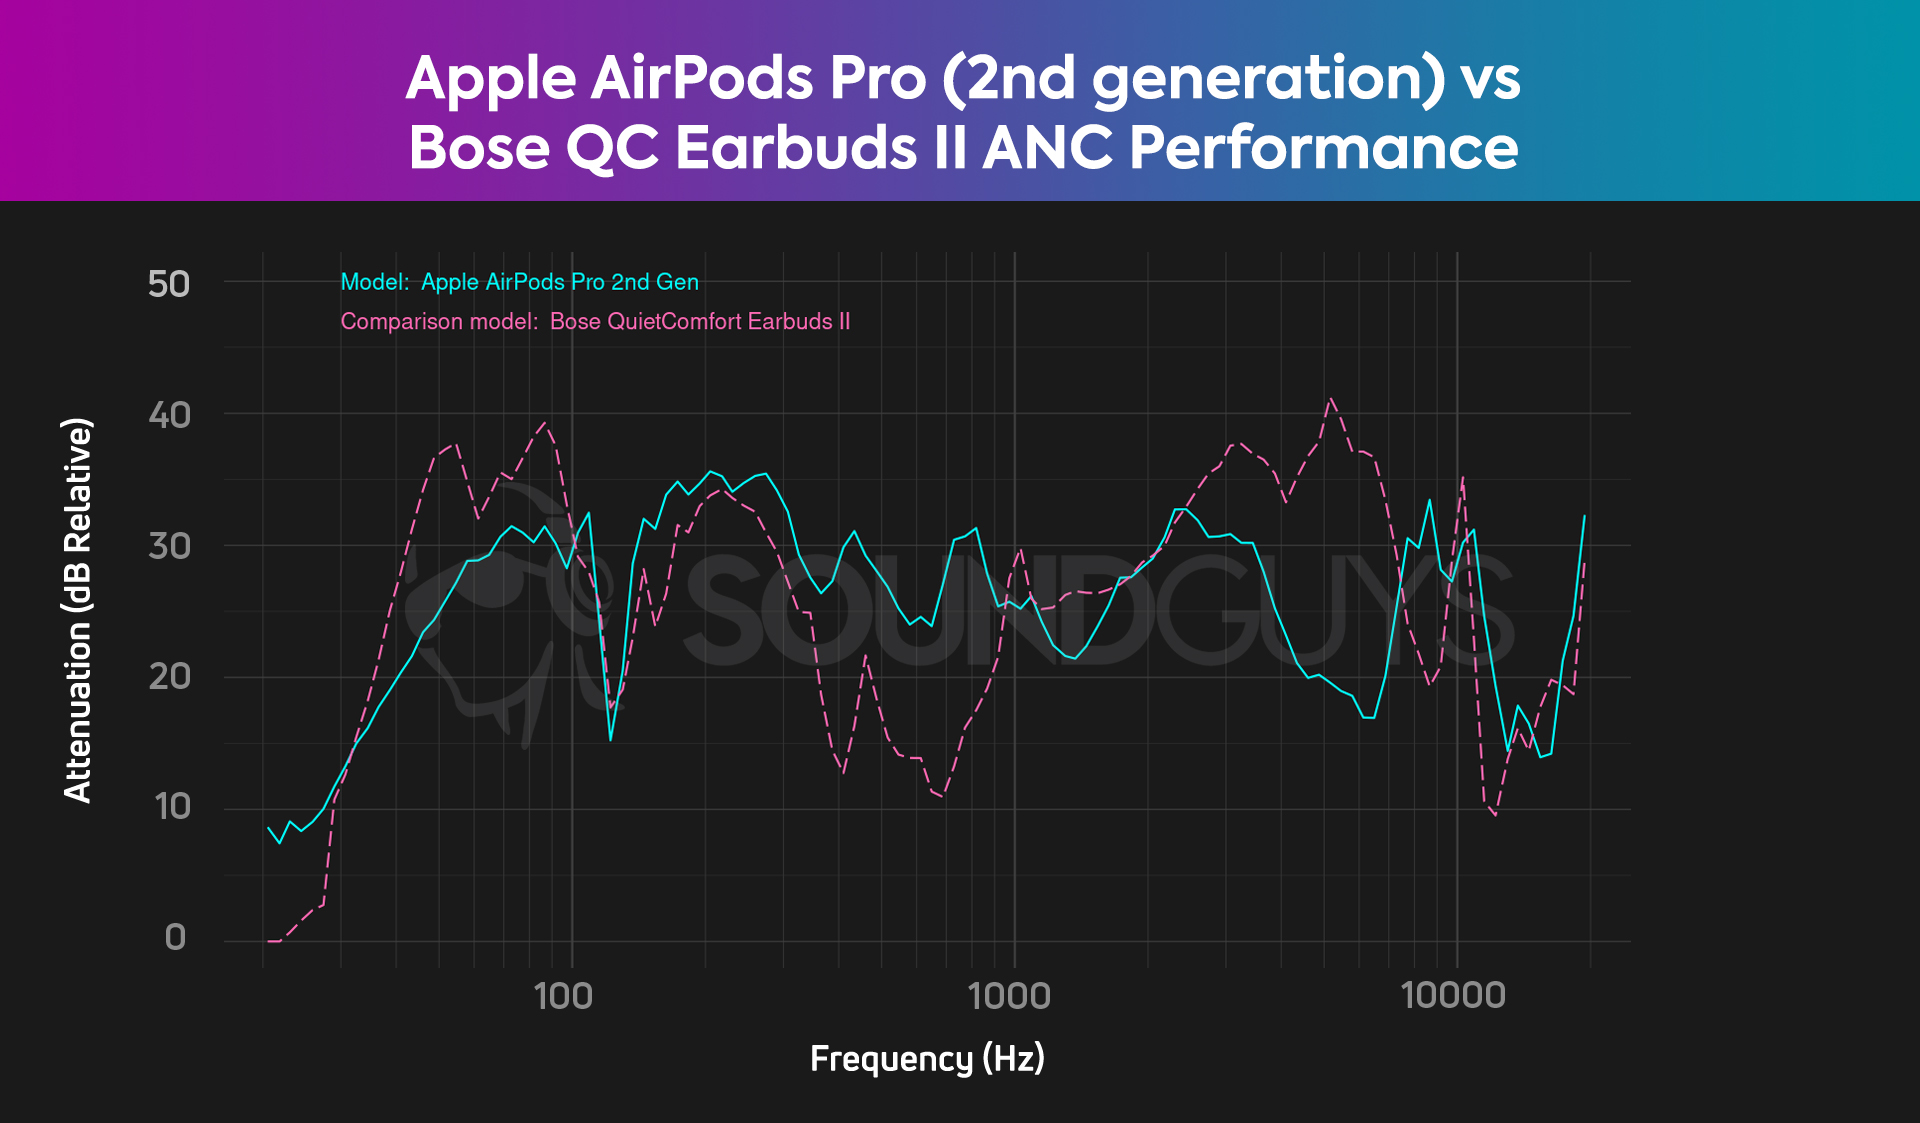 The noise canceling comparison chart for the AirPods Pro (2nd generation) and the Bose QuietComfort Earbuds II, which shows that the AirPods Pro (2nd generation) has better noise canceling than the QuietComfort Earbuds, especially in the mid range.